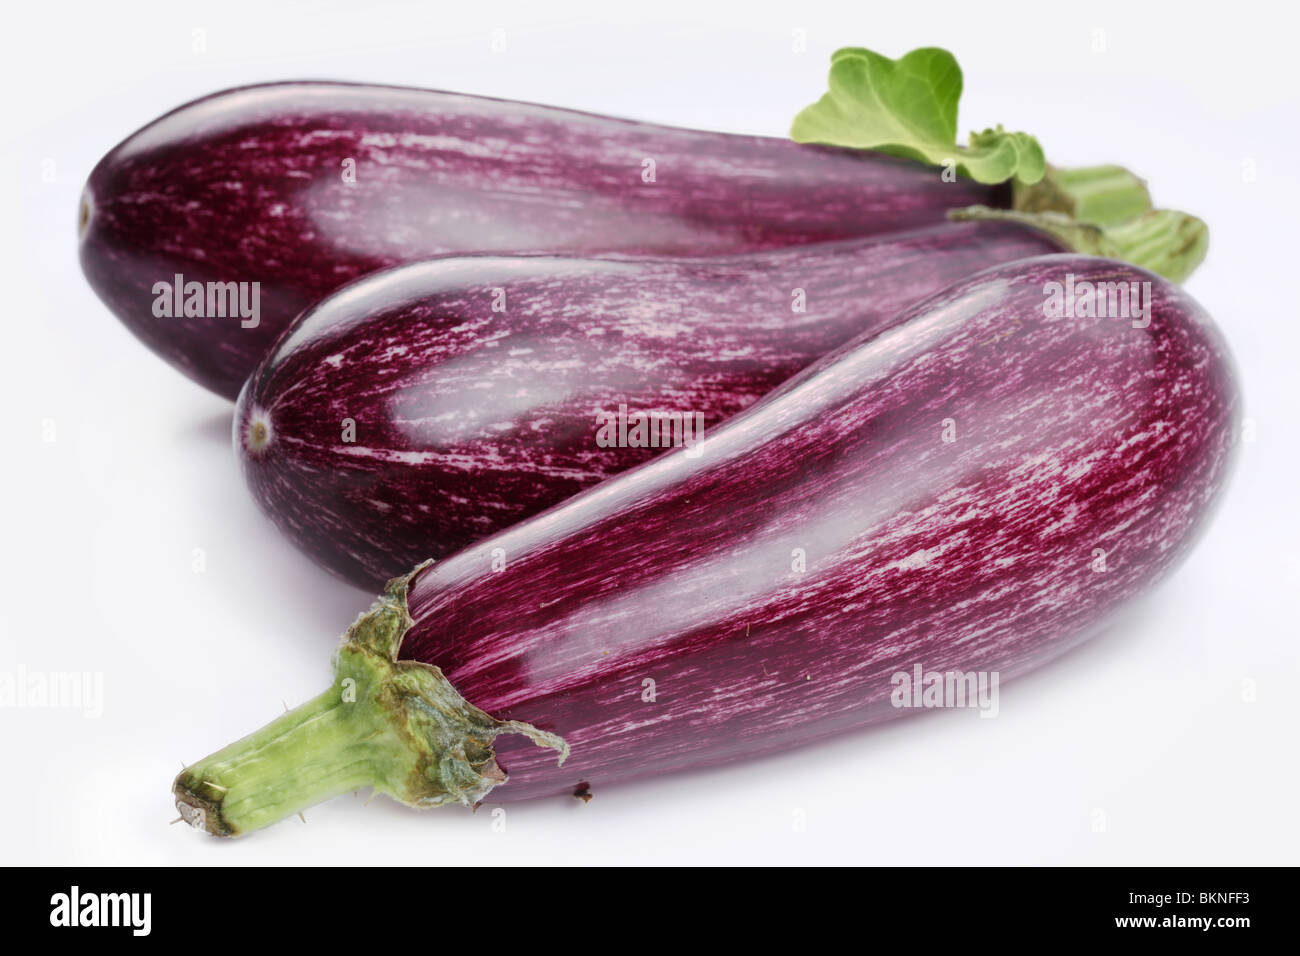 Purple eggplants with leaves on white background Stock Photo